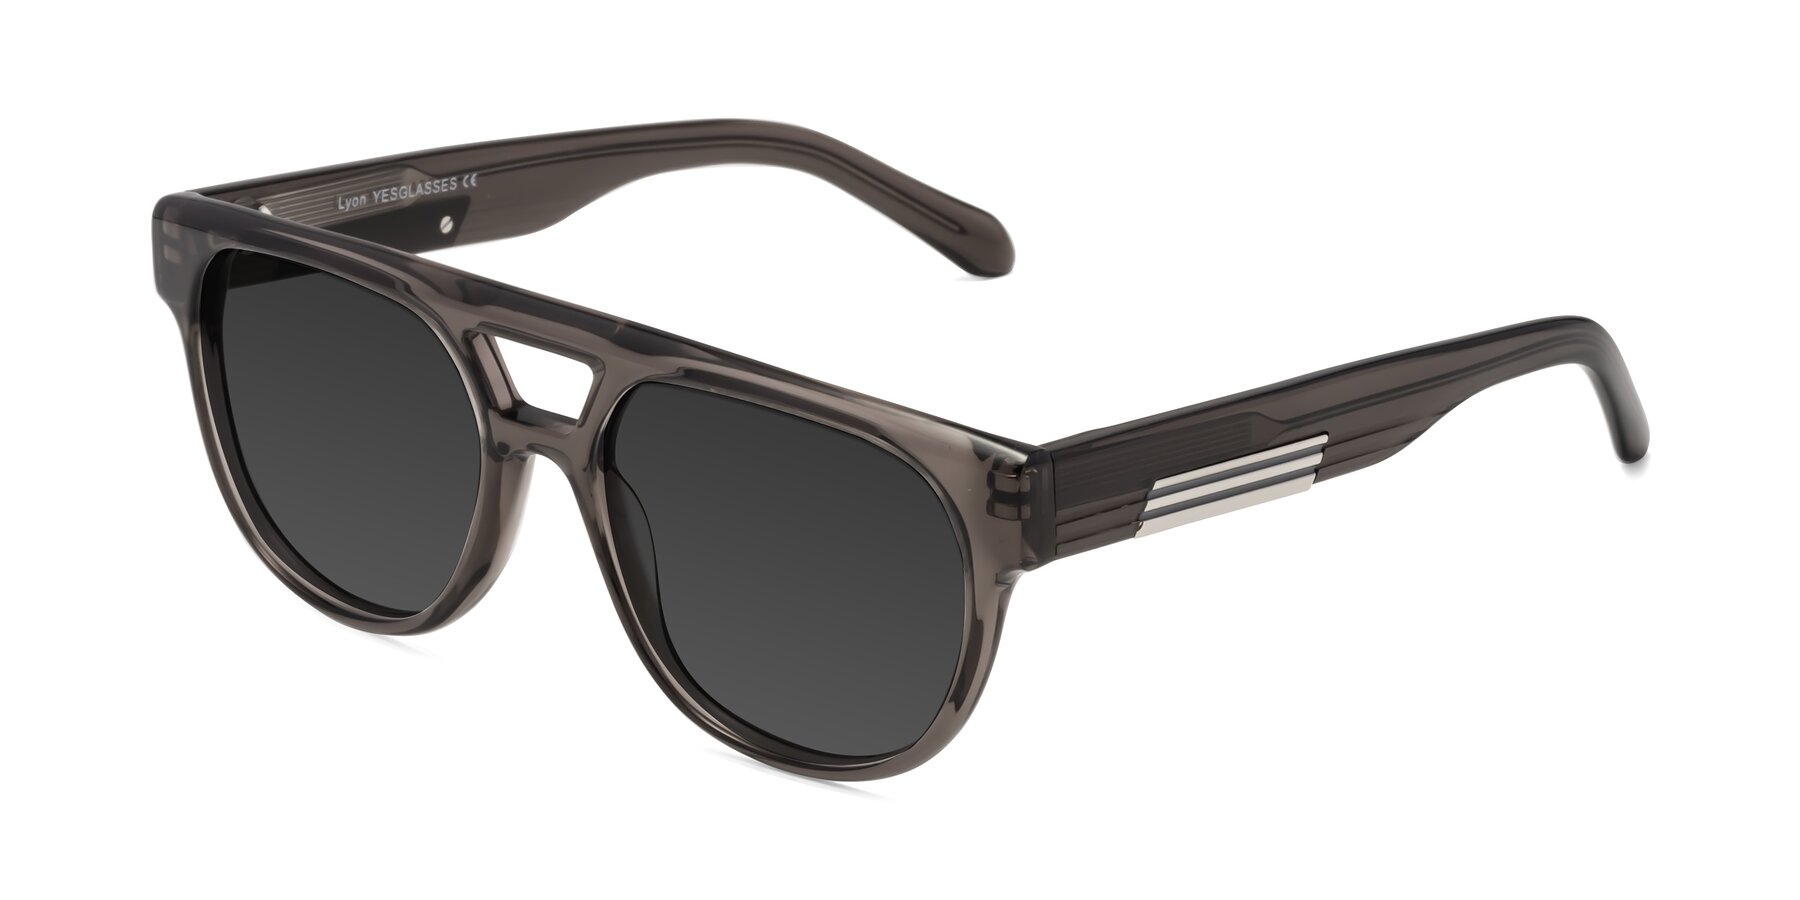 Angle of Lyon in Charcoal Gray with Gray Tinted Lenses